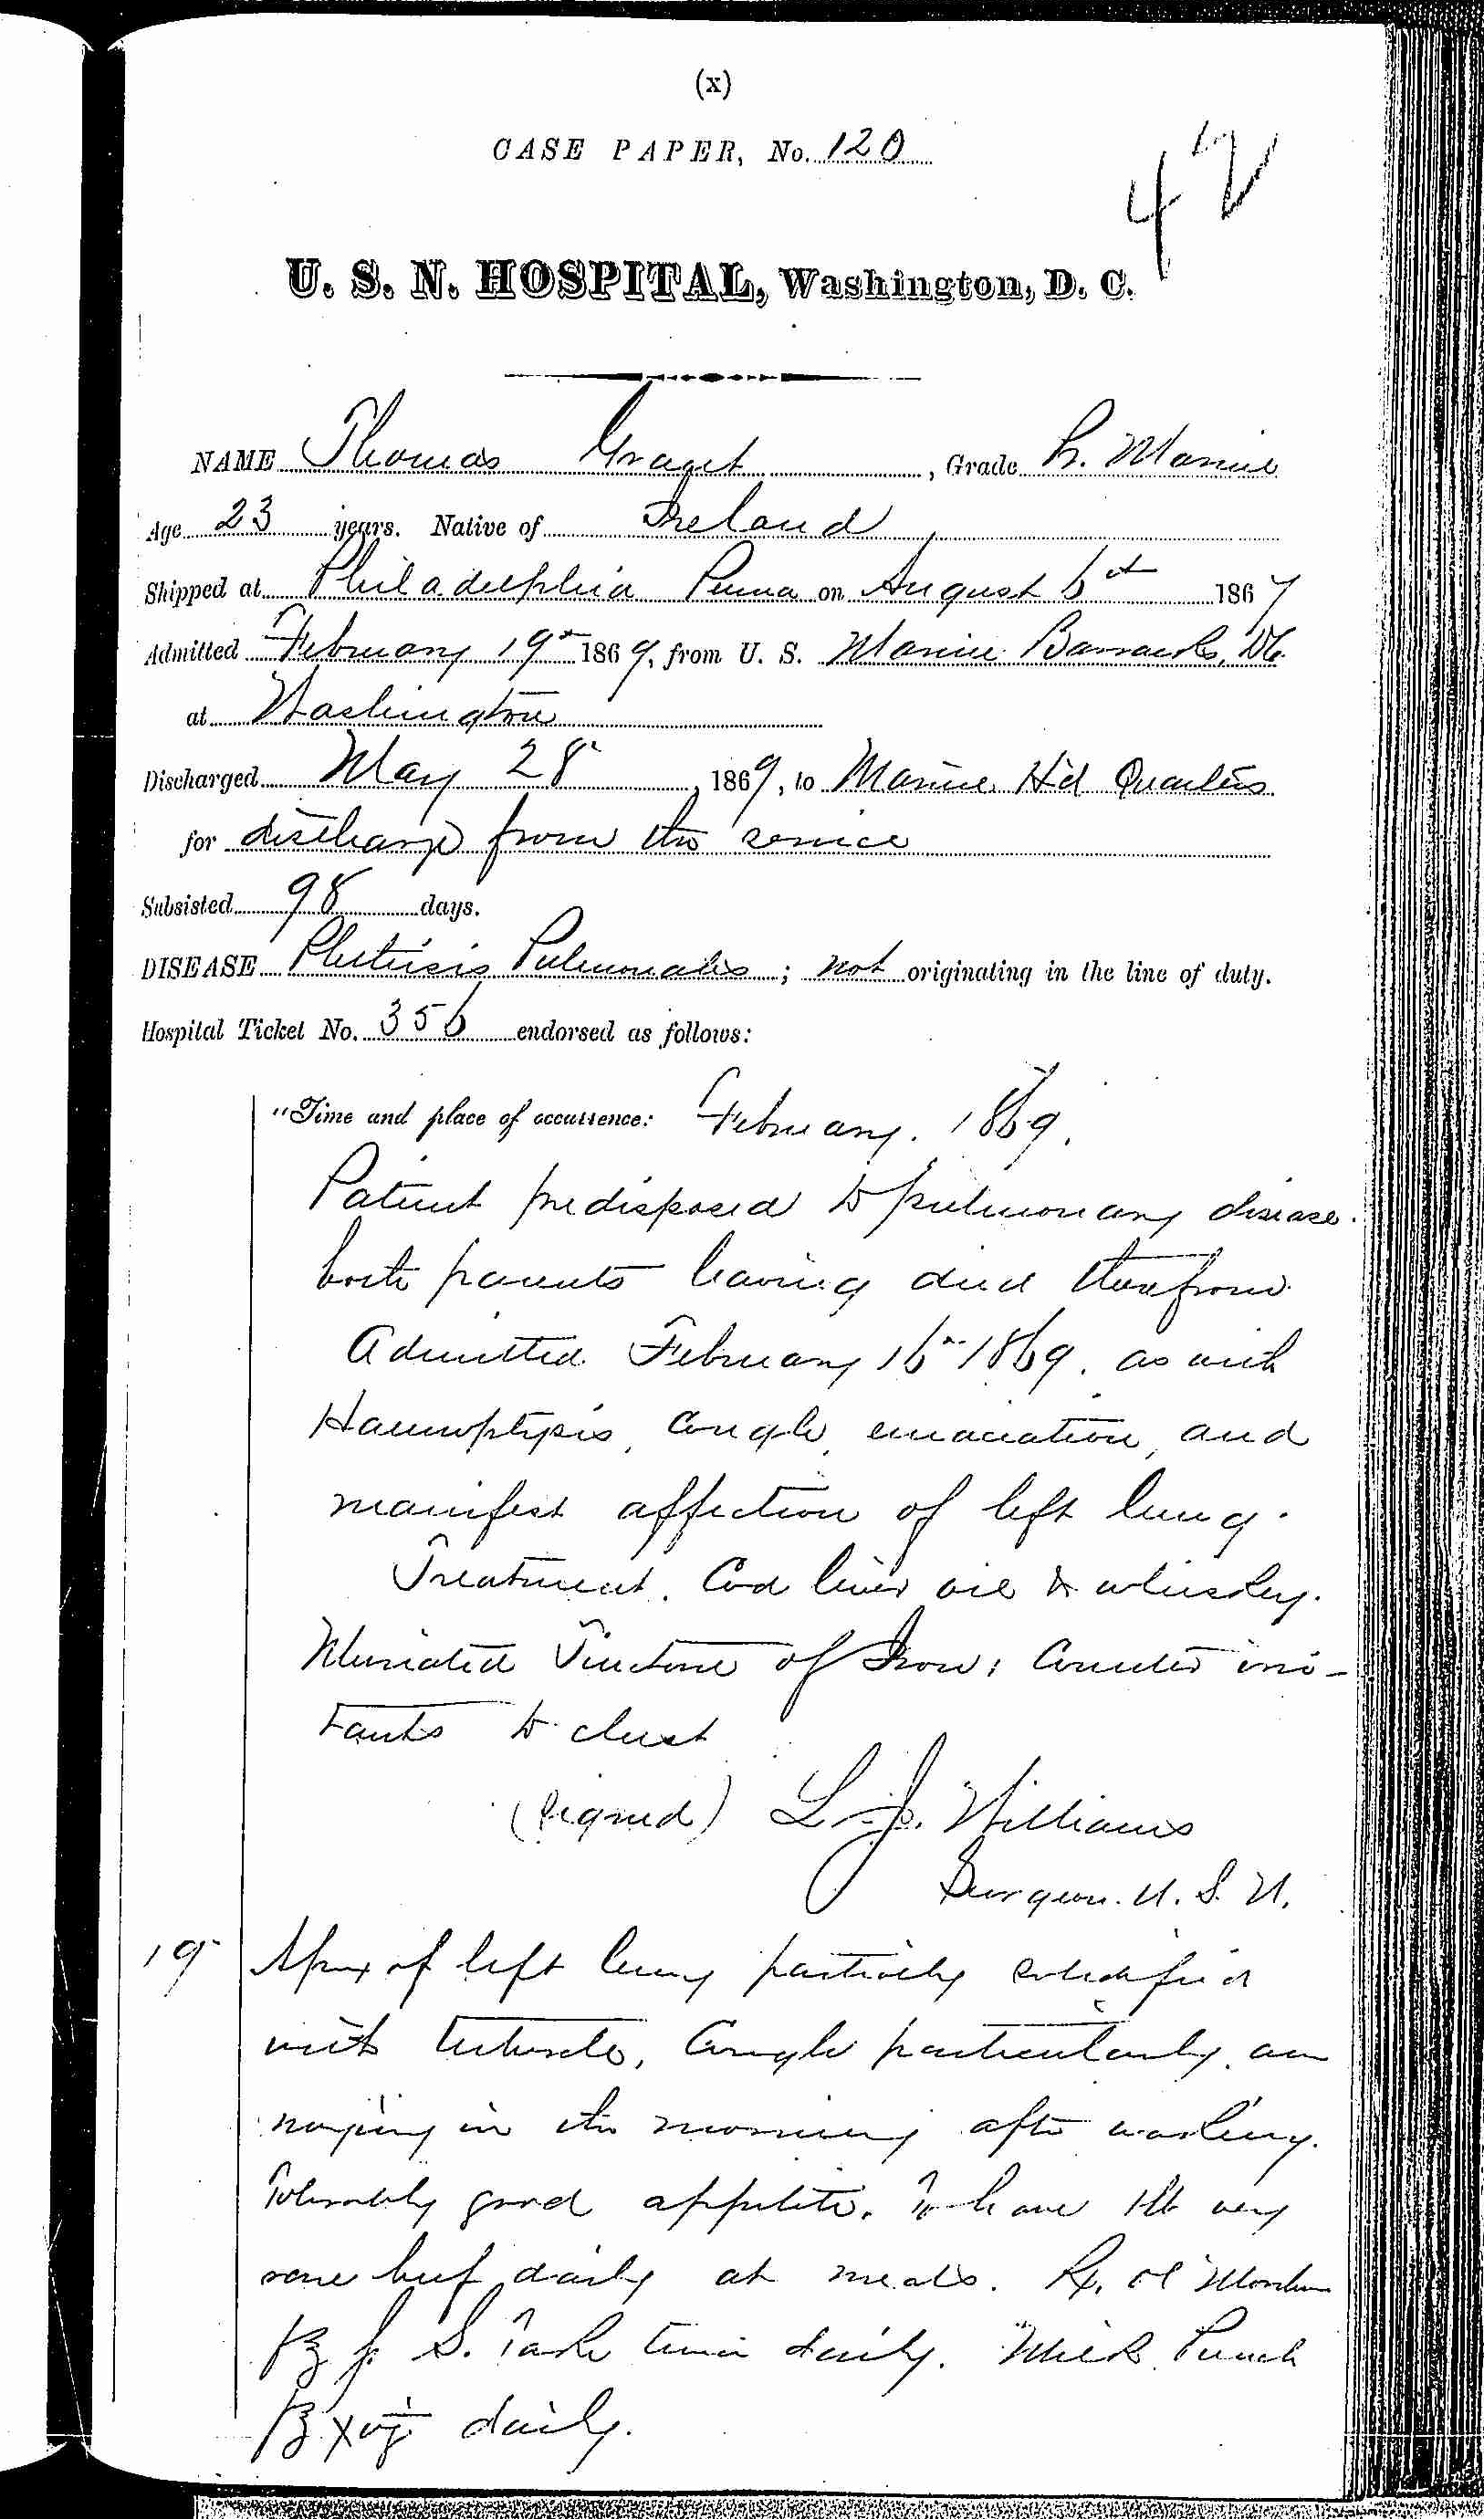 Entry for Thomas Grant (page 1 of 4) in the log Hospital Tickets and Case Papers - Naval Hospital - Washington, D.C. - 1868-69